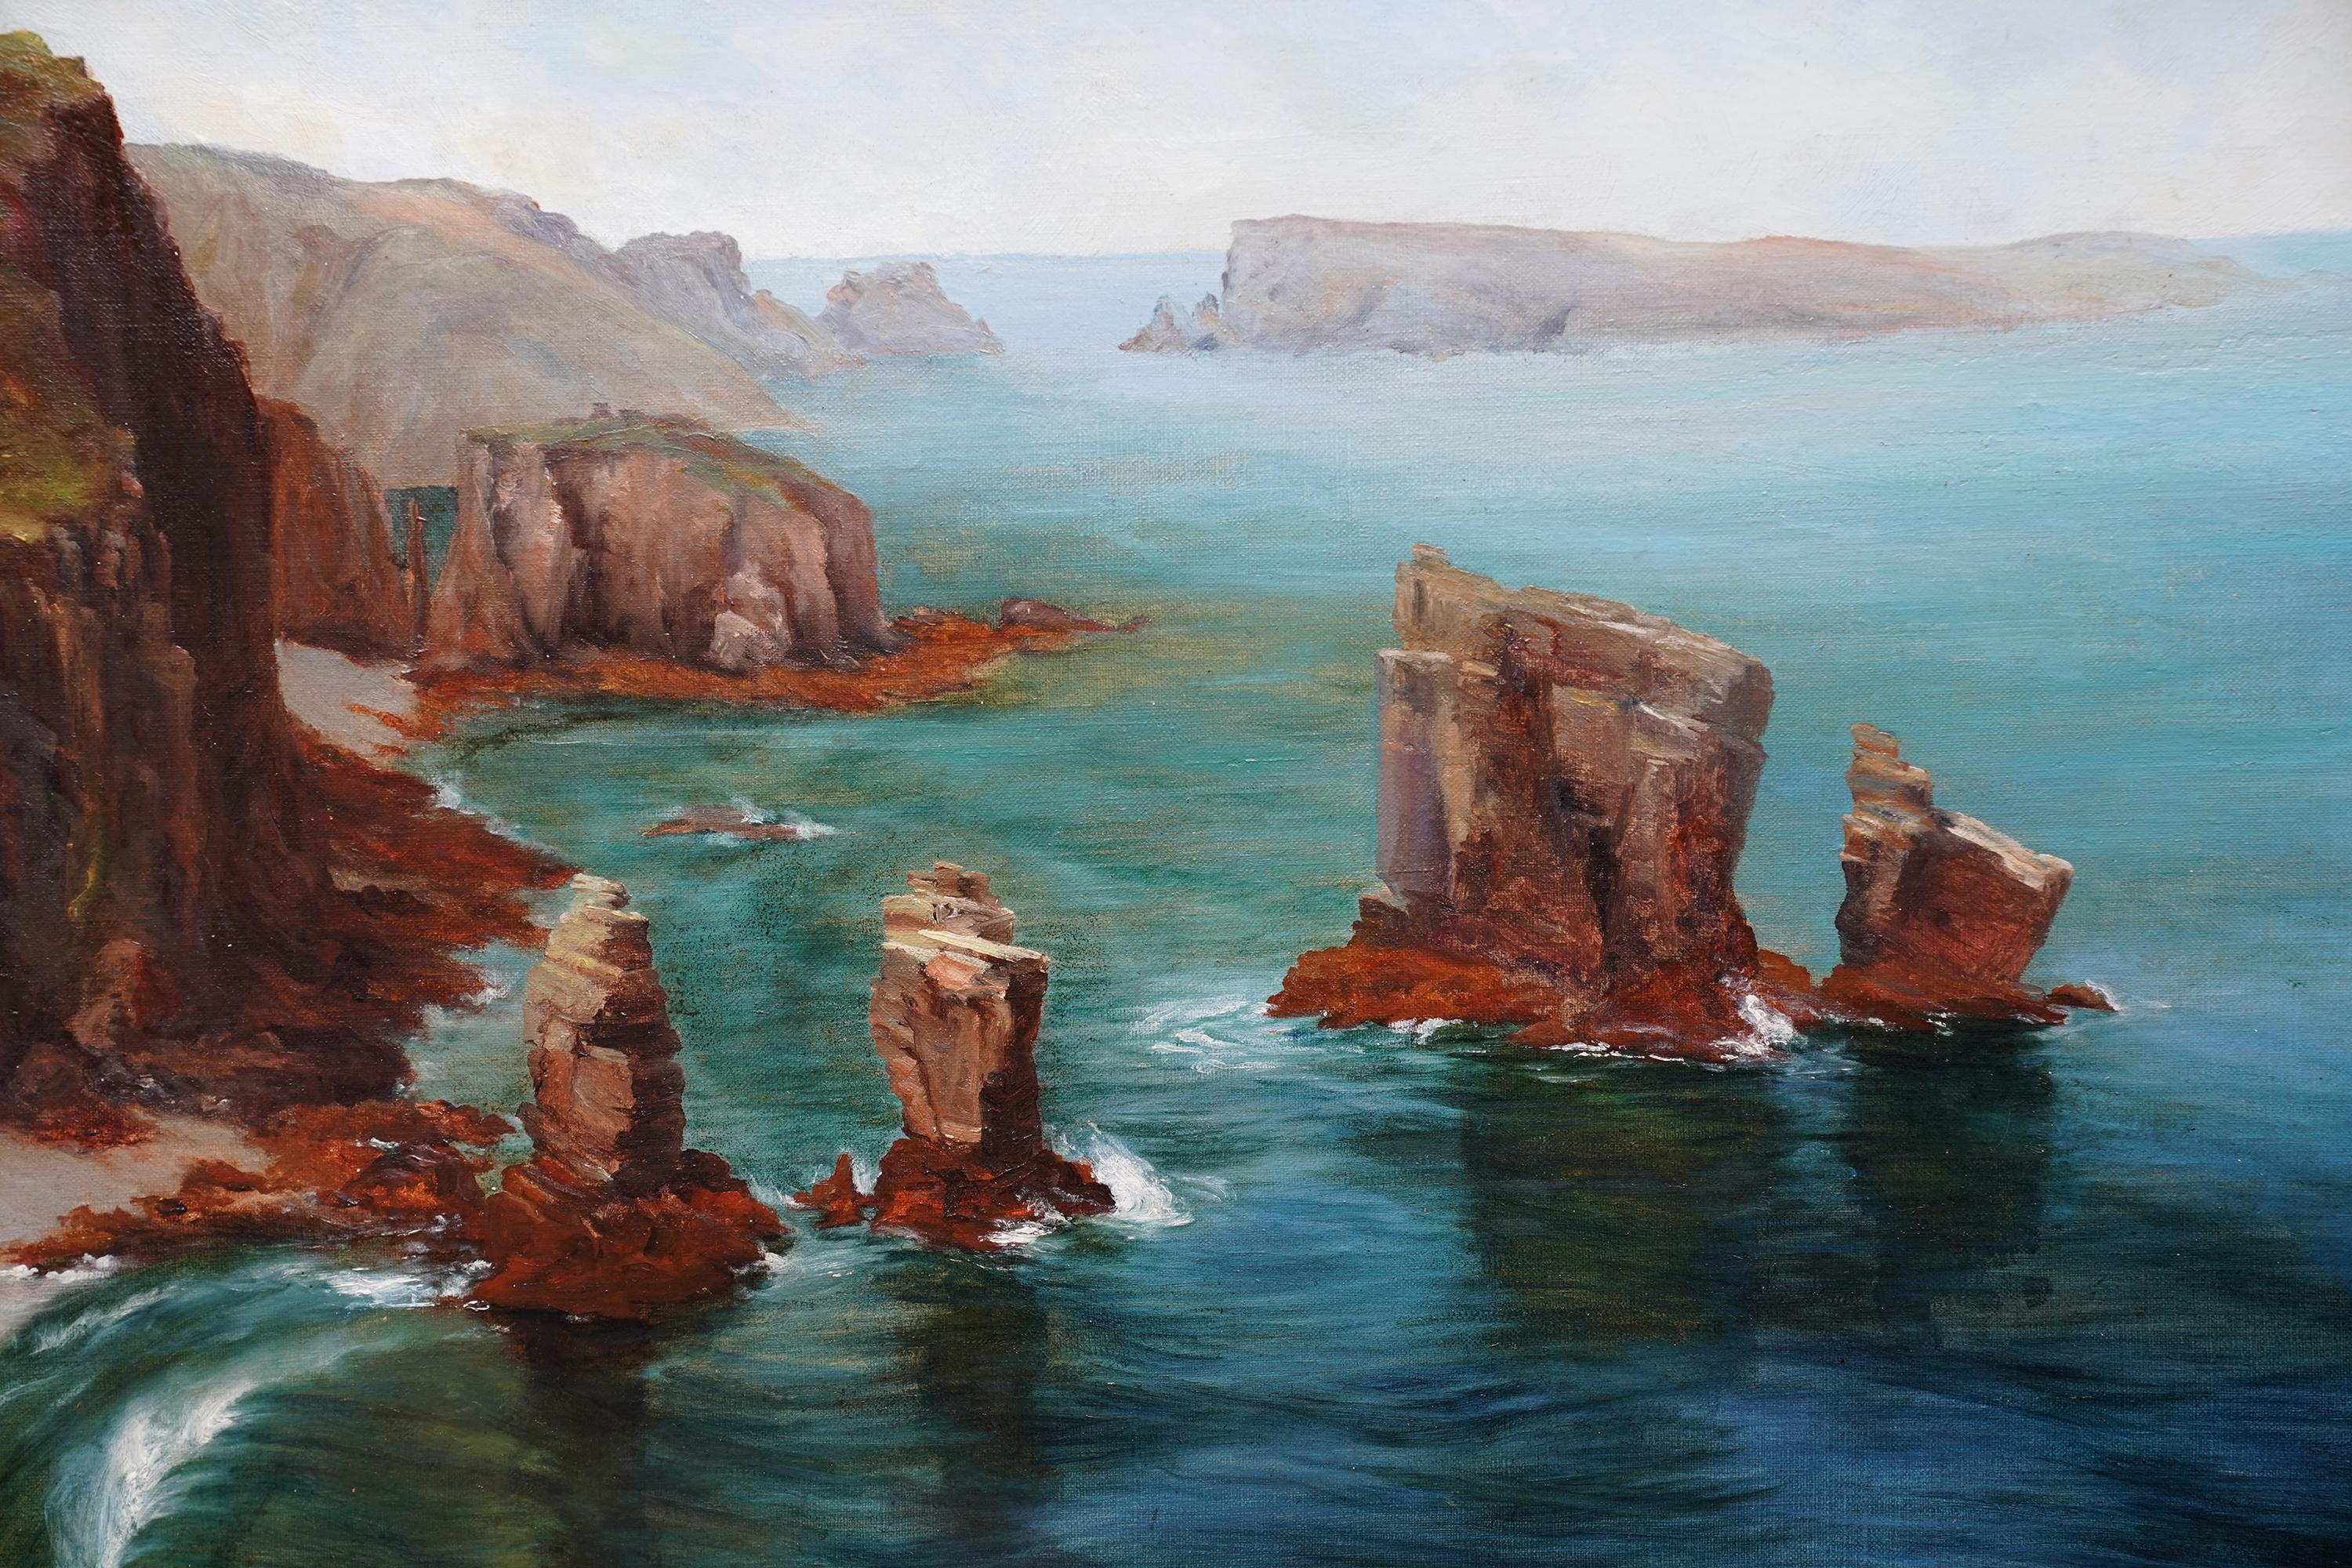 This atmospheric British Edwardian oil painting is by noted Welsh artist Alan Stepney Gulston. Painted circa 1910 it is a sunny Pembrokeshire coastal view from the high vantage point of the cliffs. Several rock stacks can be seen with waves crashing